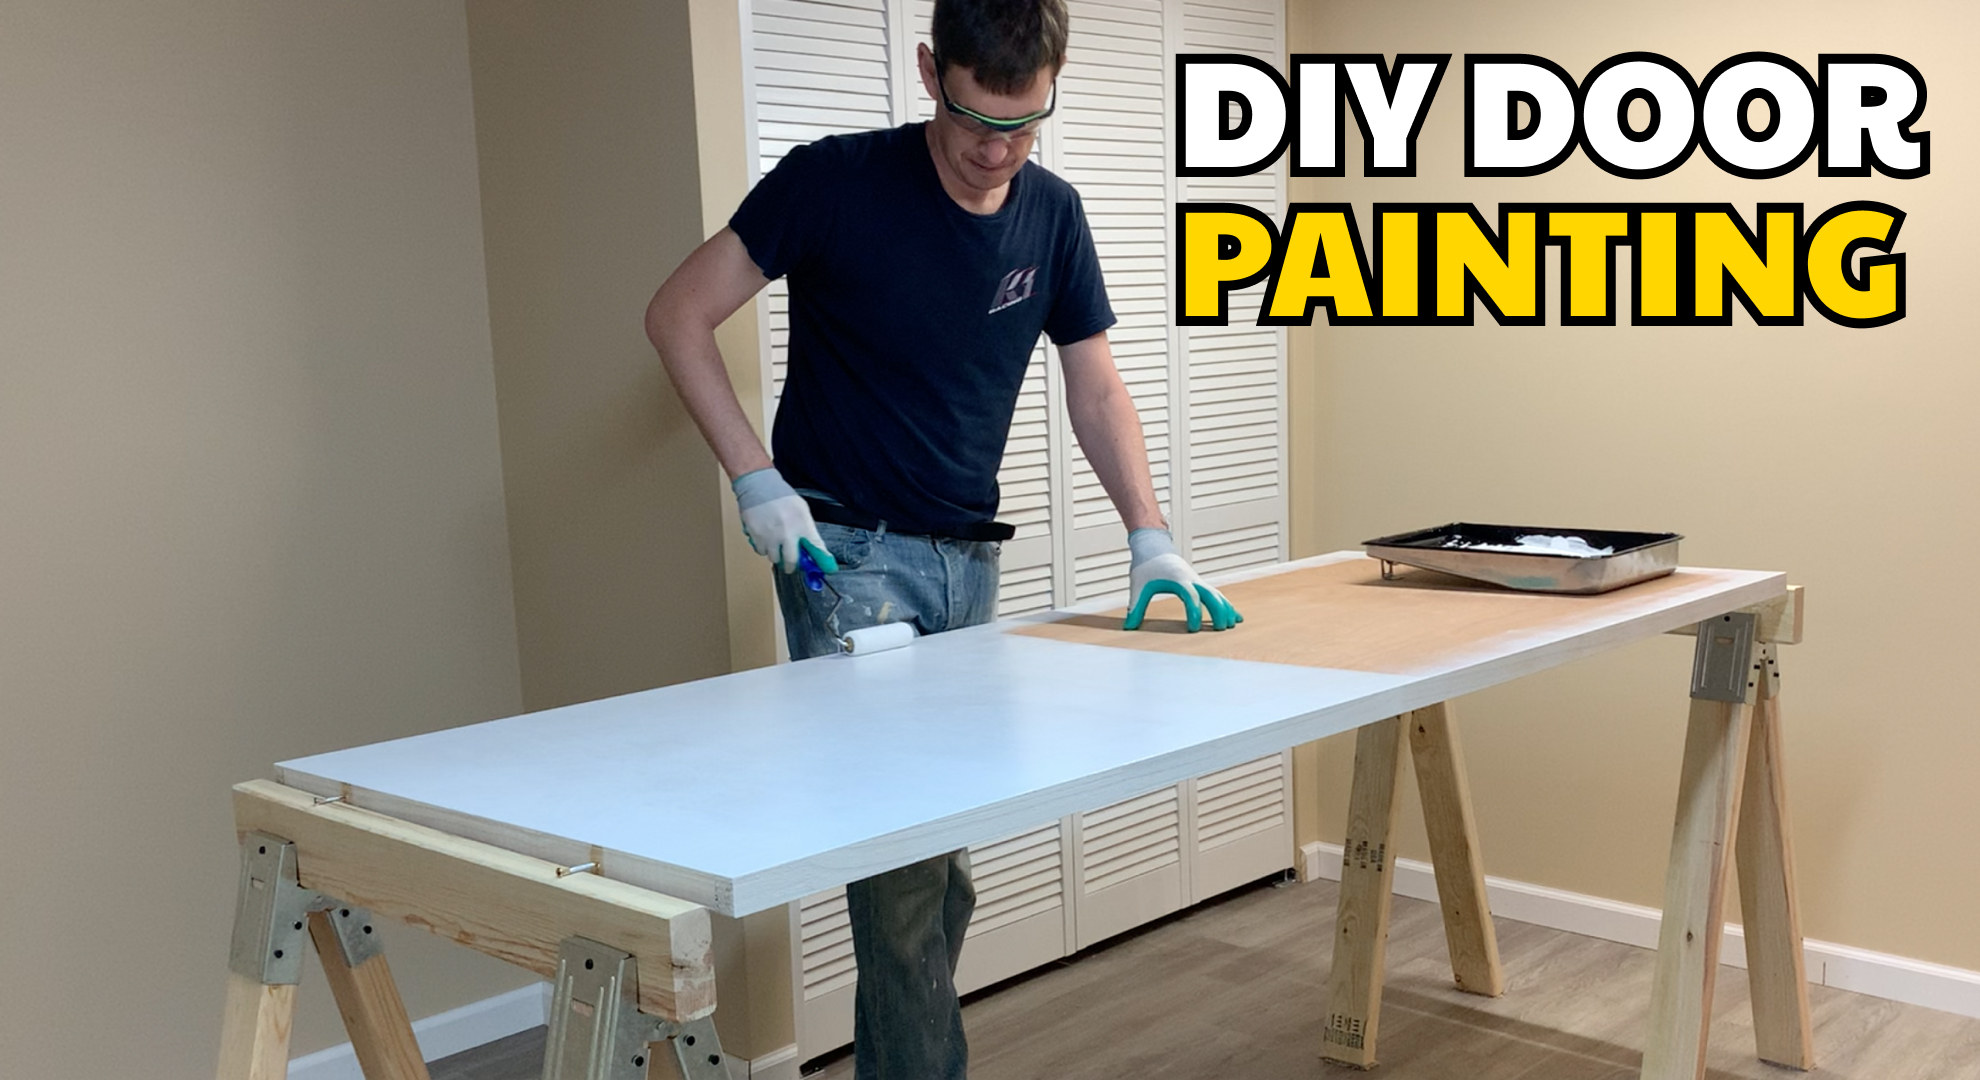 Learn the art of door painting with our step-by-step guide. Elevate your space with a fresh, vibrant look. Get started today!